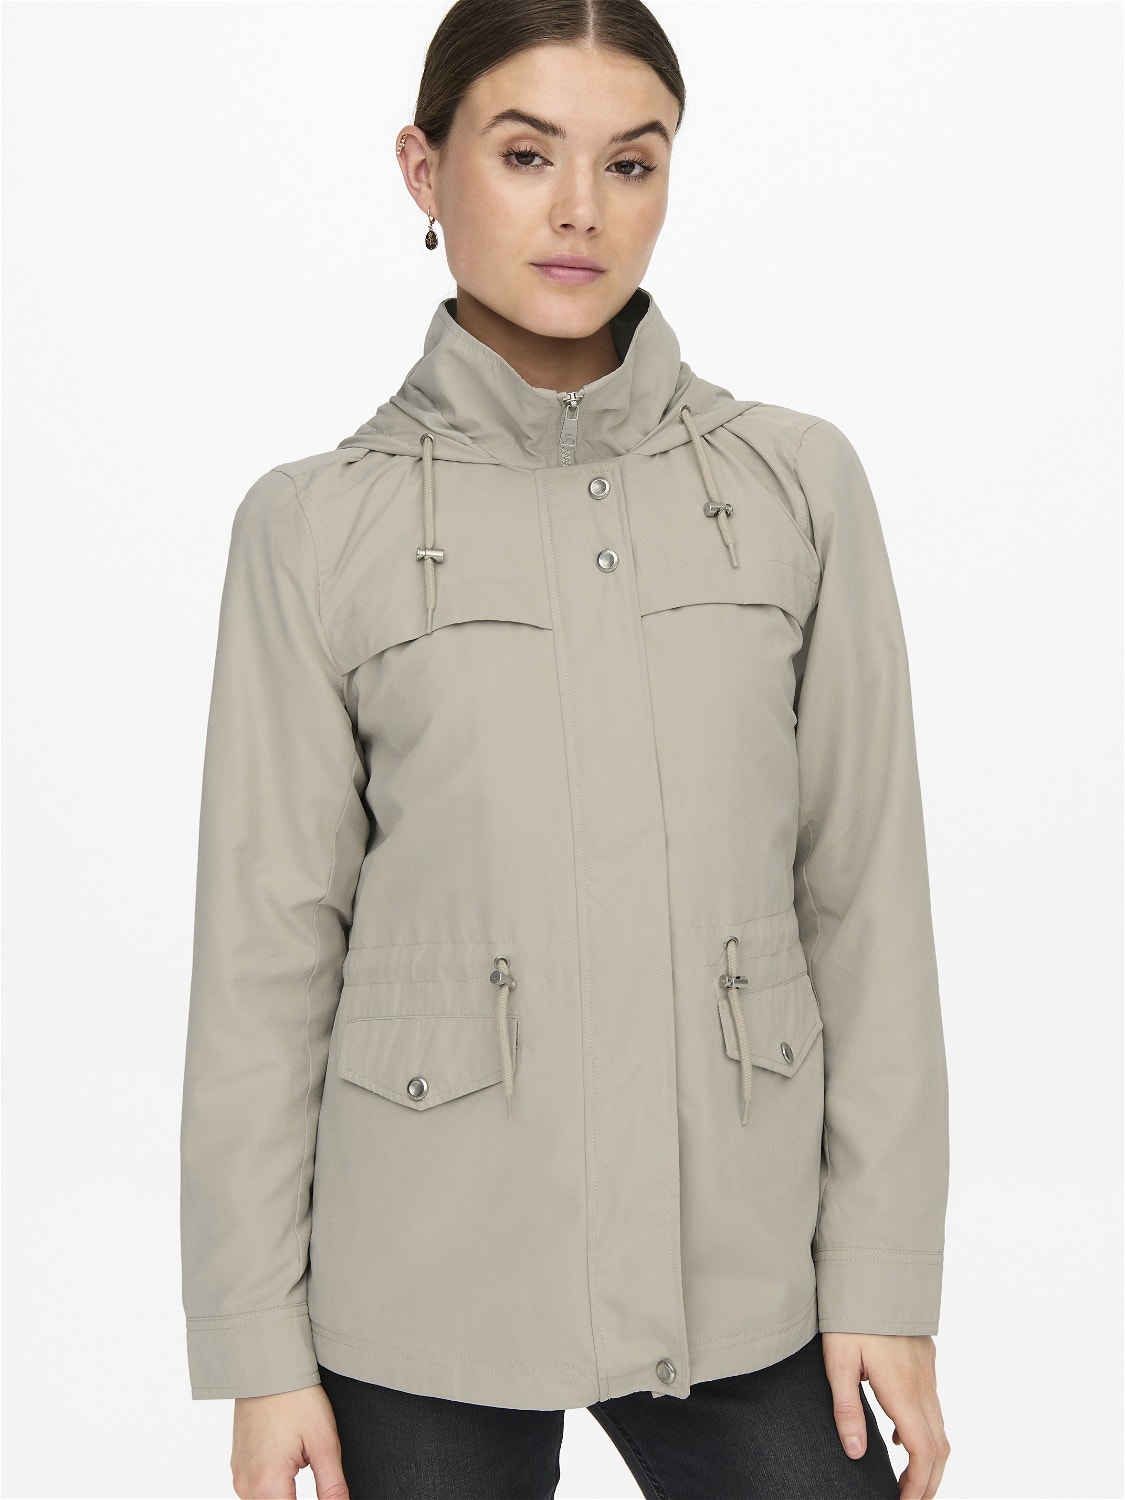 ONLY High neck Jacket -Silver Lining - 15218612